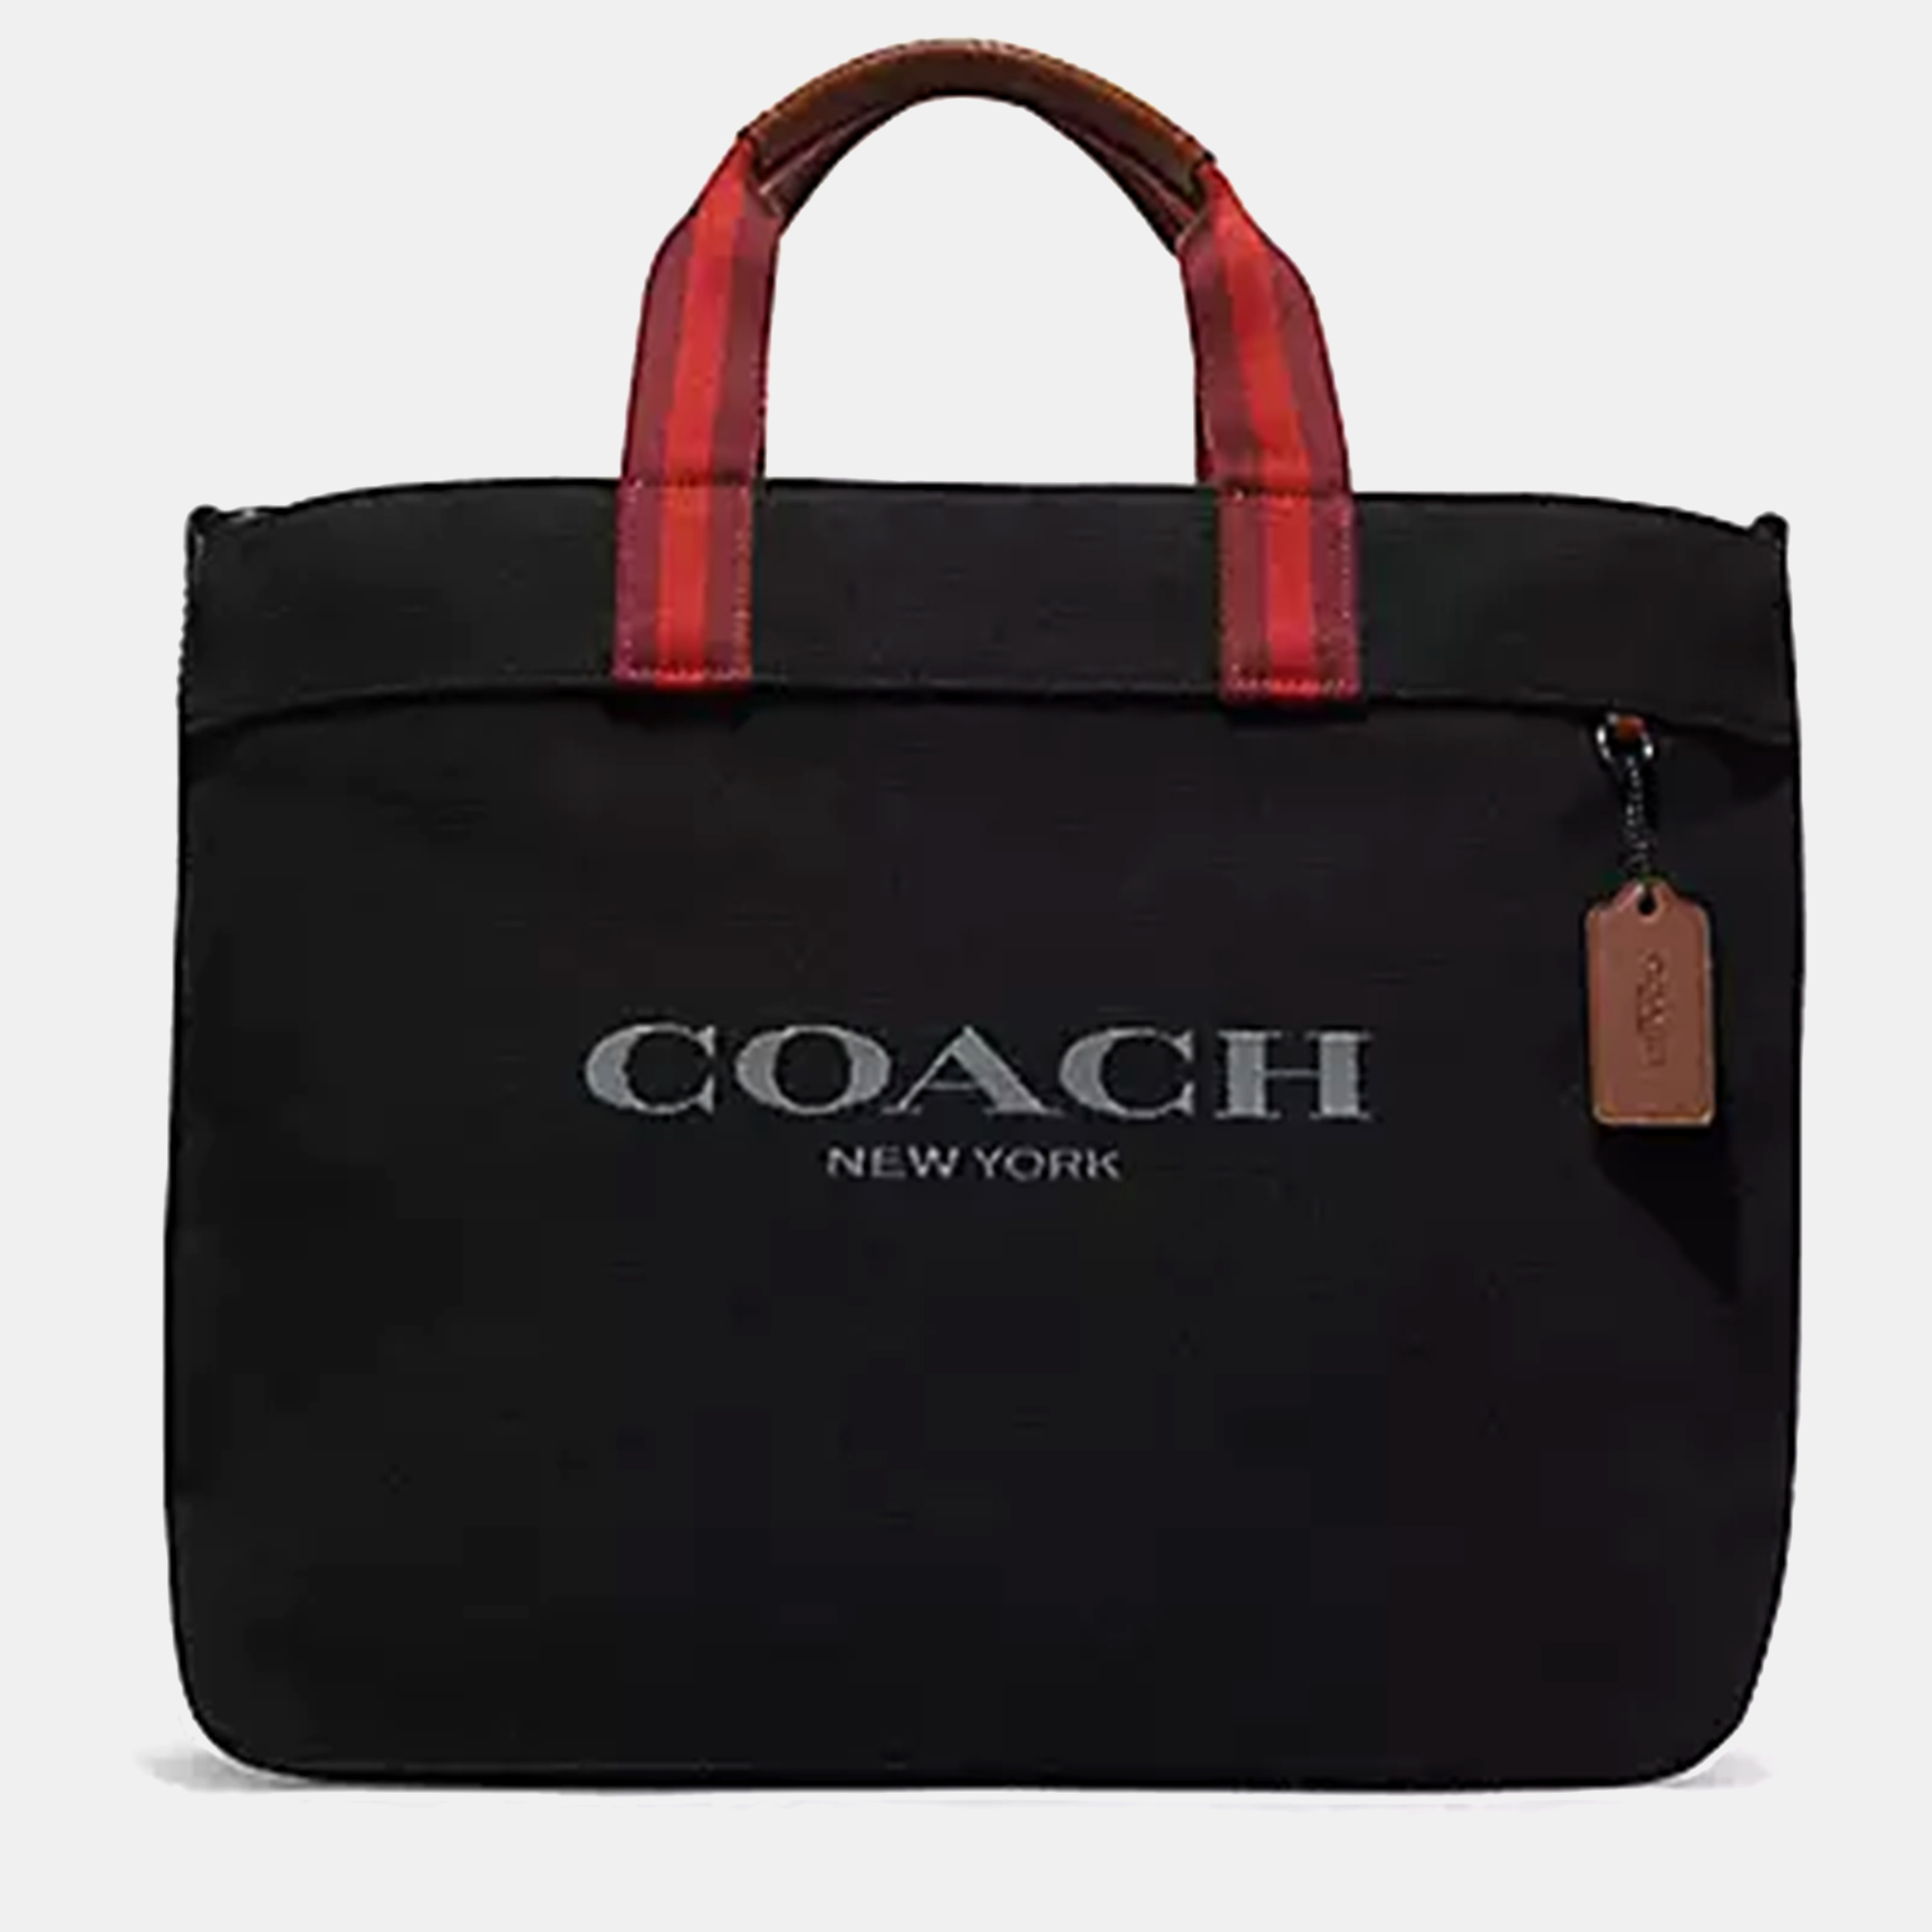 Coach Black Canvas And Leather Tote Bag